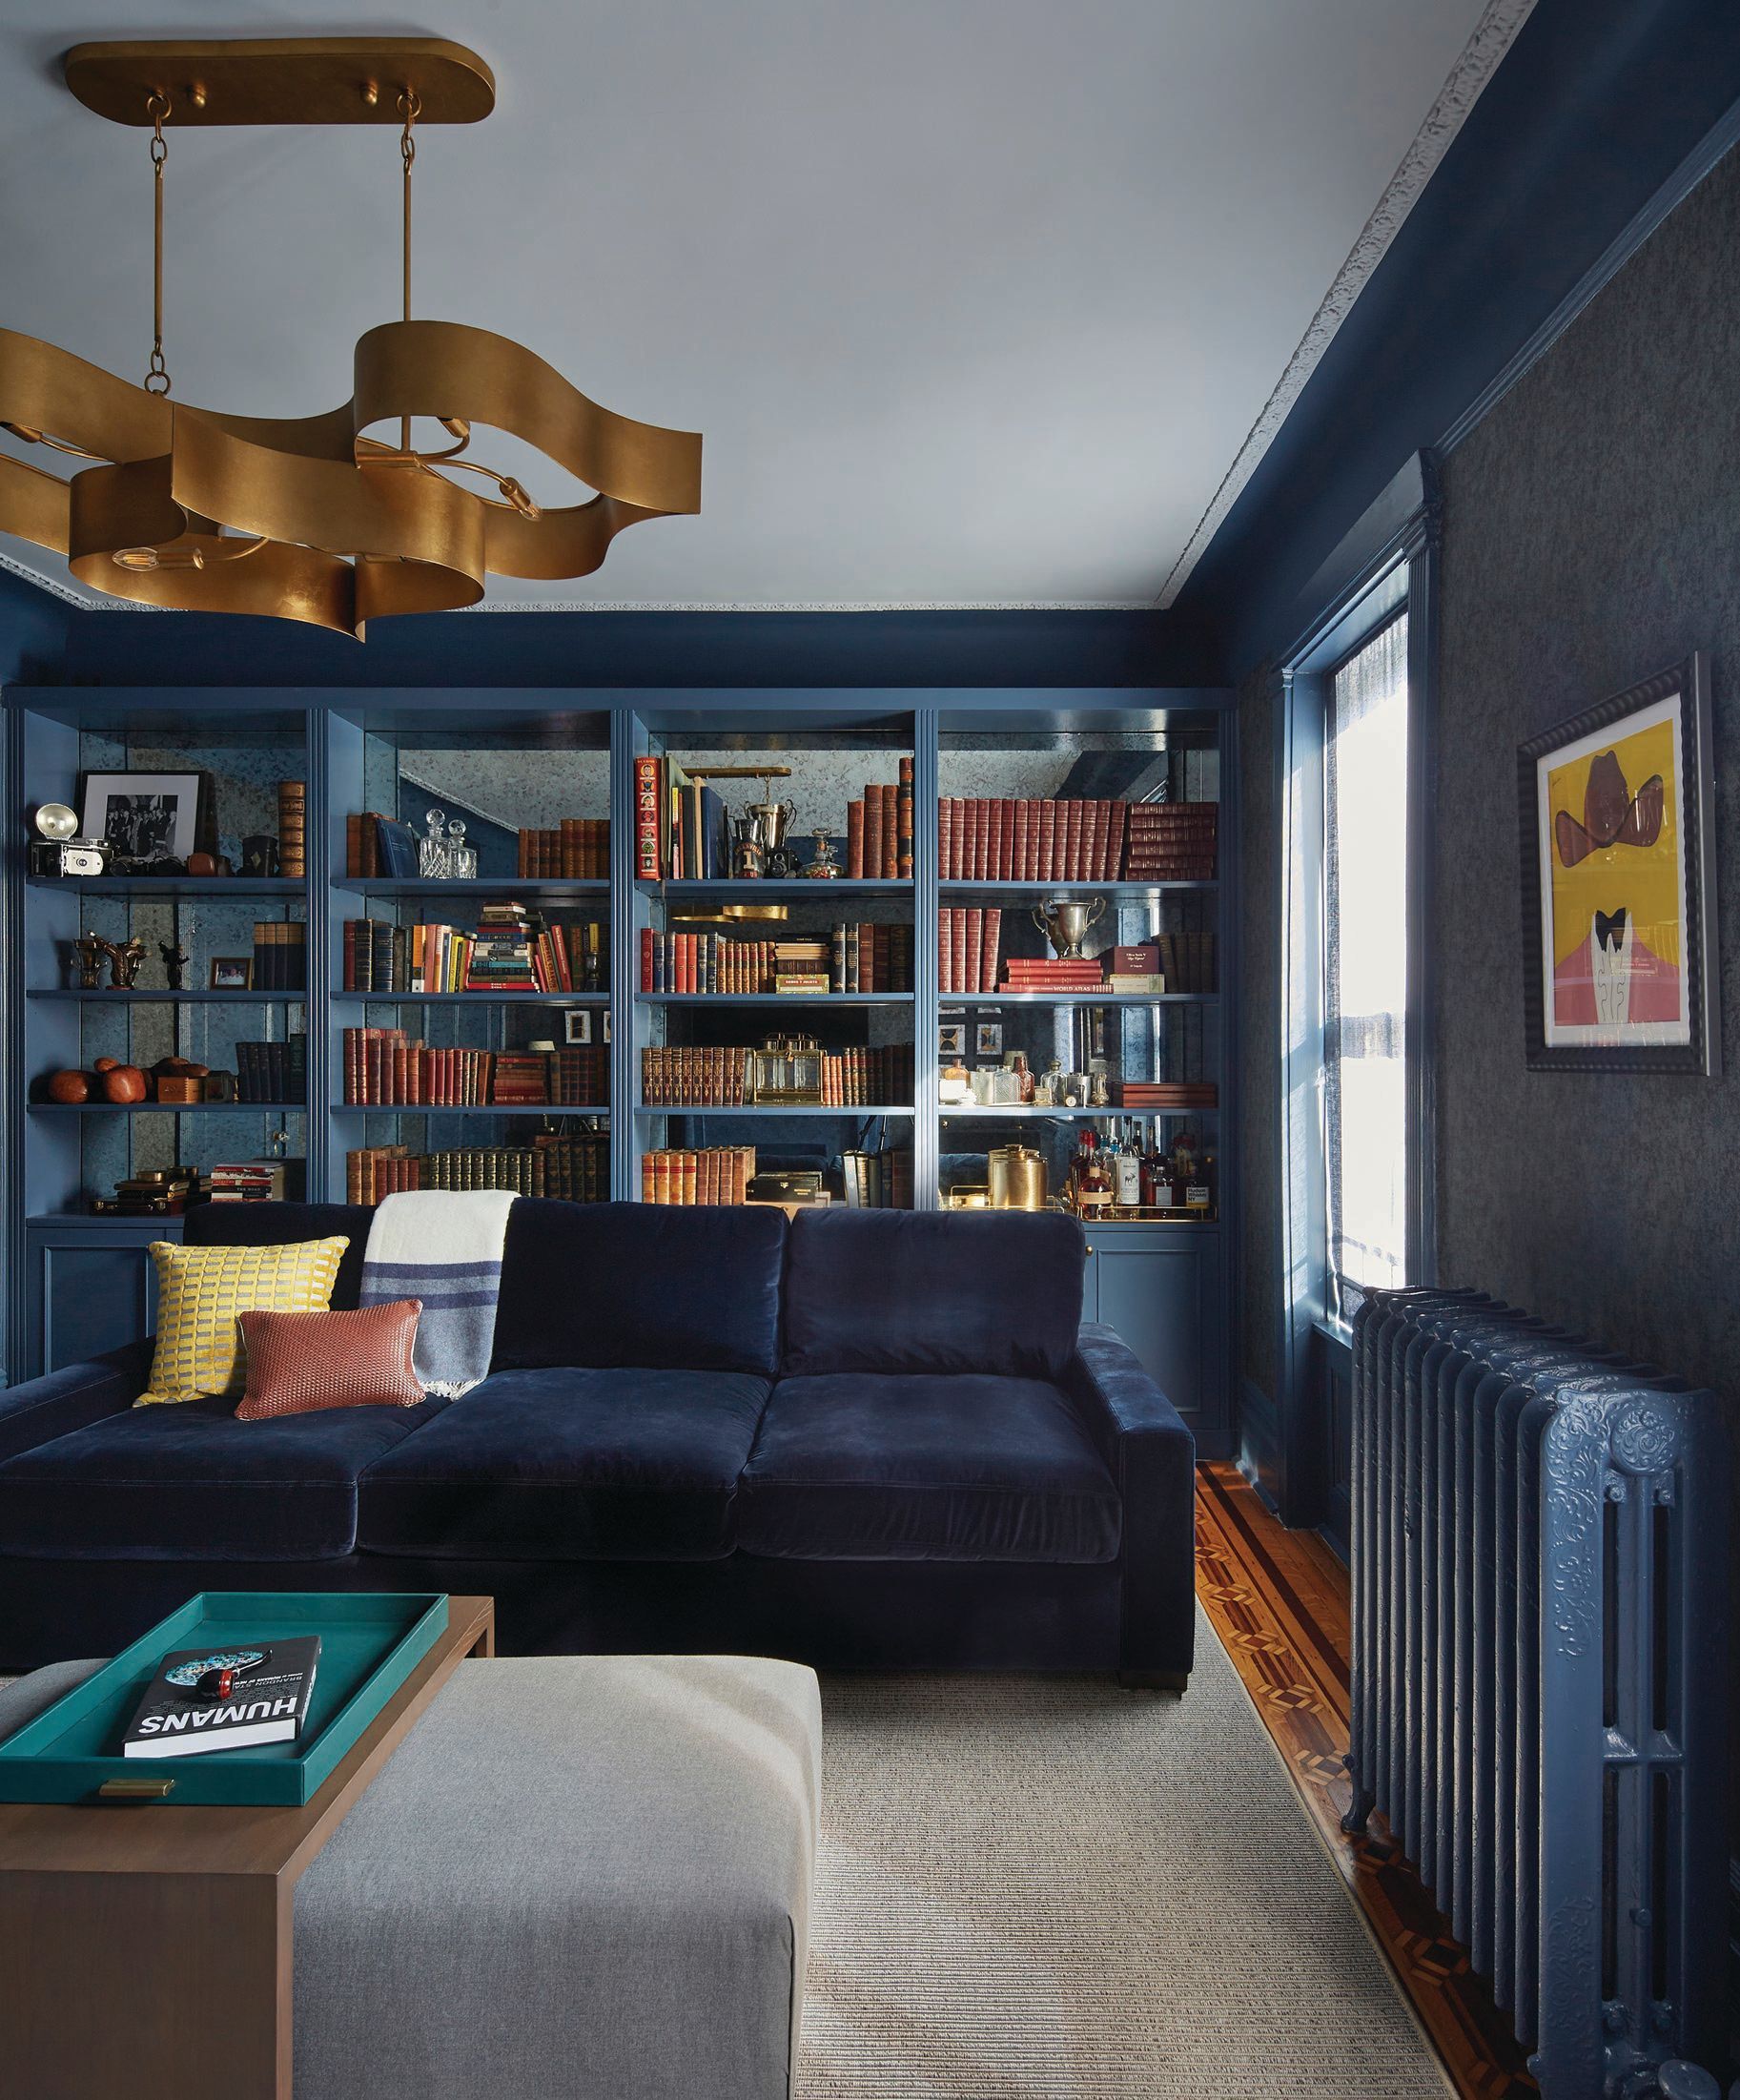 In the study, Phillip Jeffries wallpaper and an antique mirror inside existing bookcases. PHOTOGRAPHED BY JACOB SNAVELY